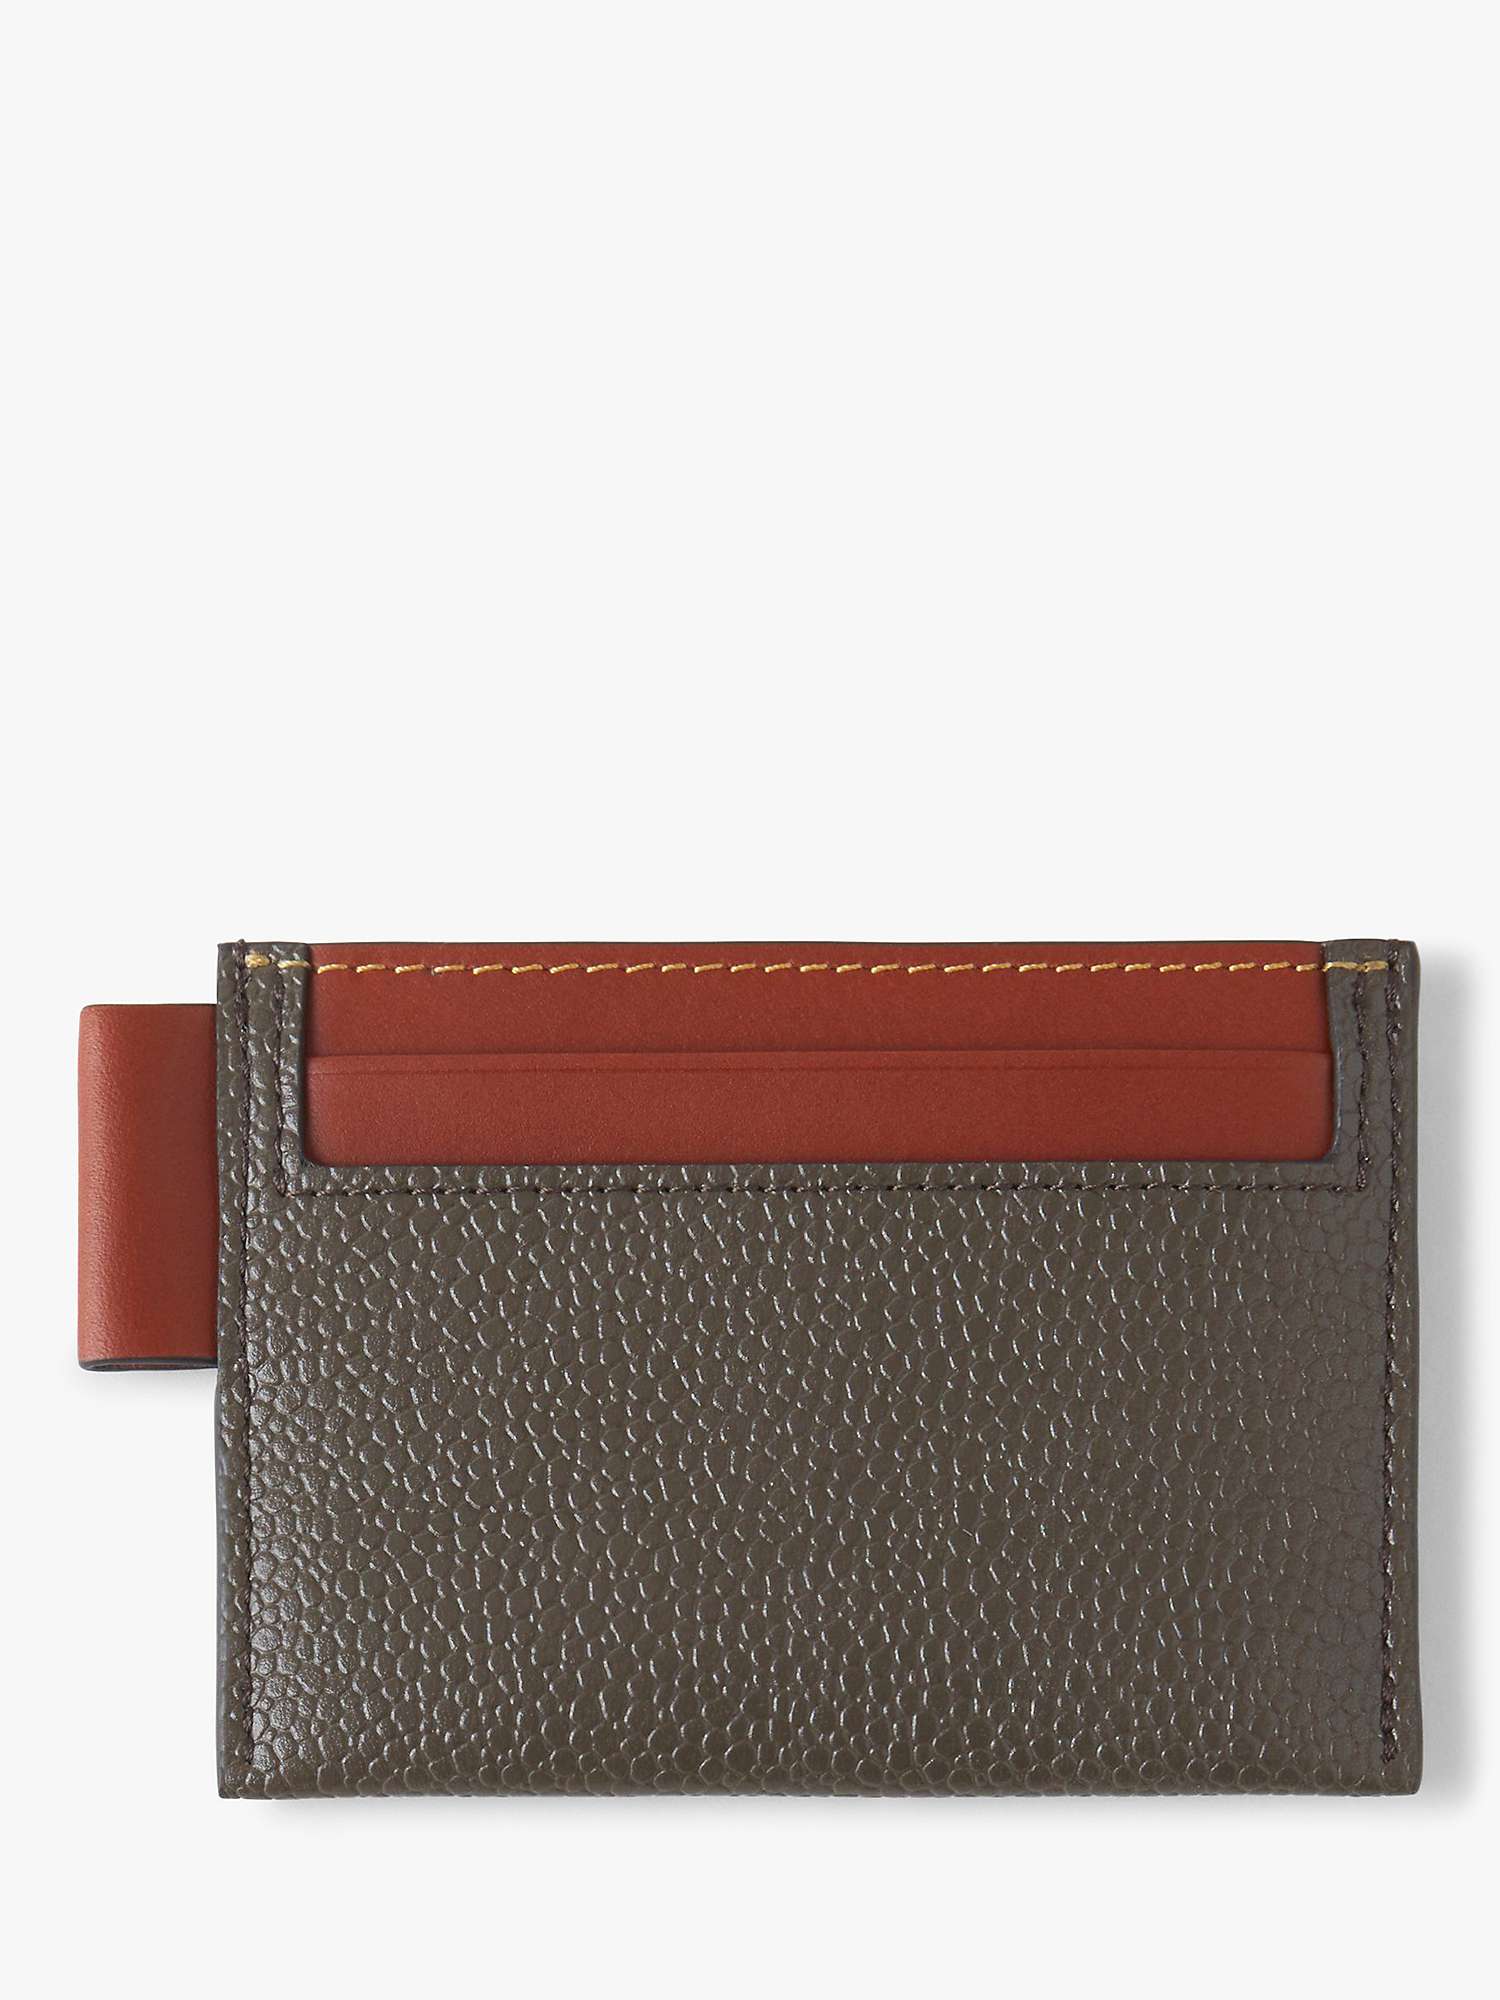 Buy Mulberry Scotch Grain Leather Credit Card Slip Online at johnlewis.com